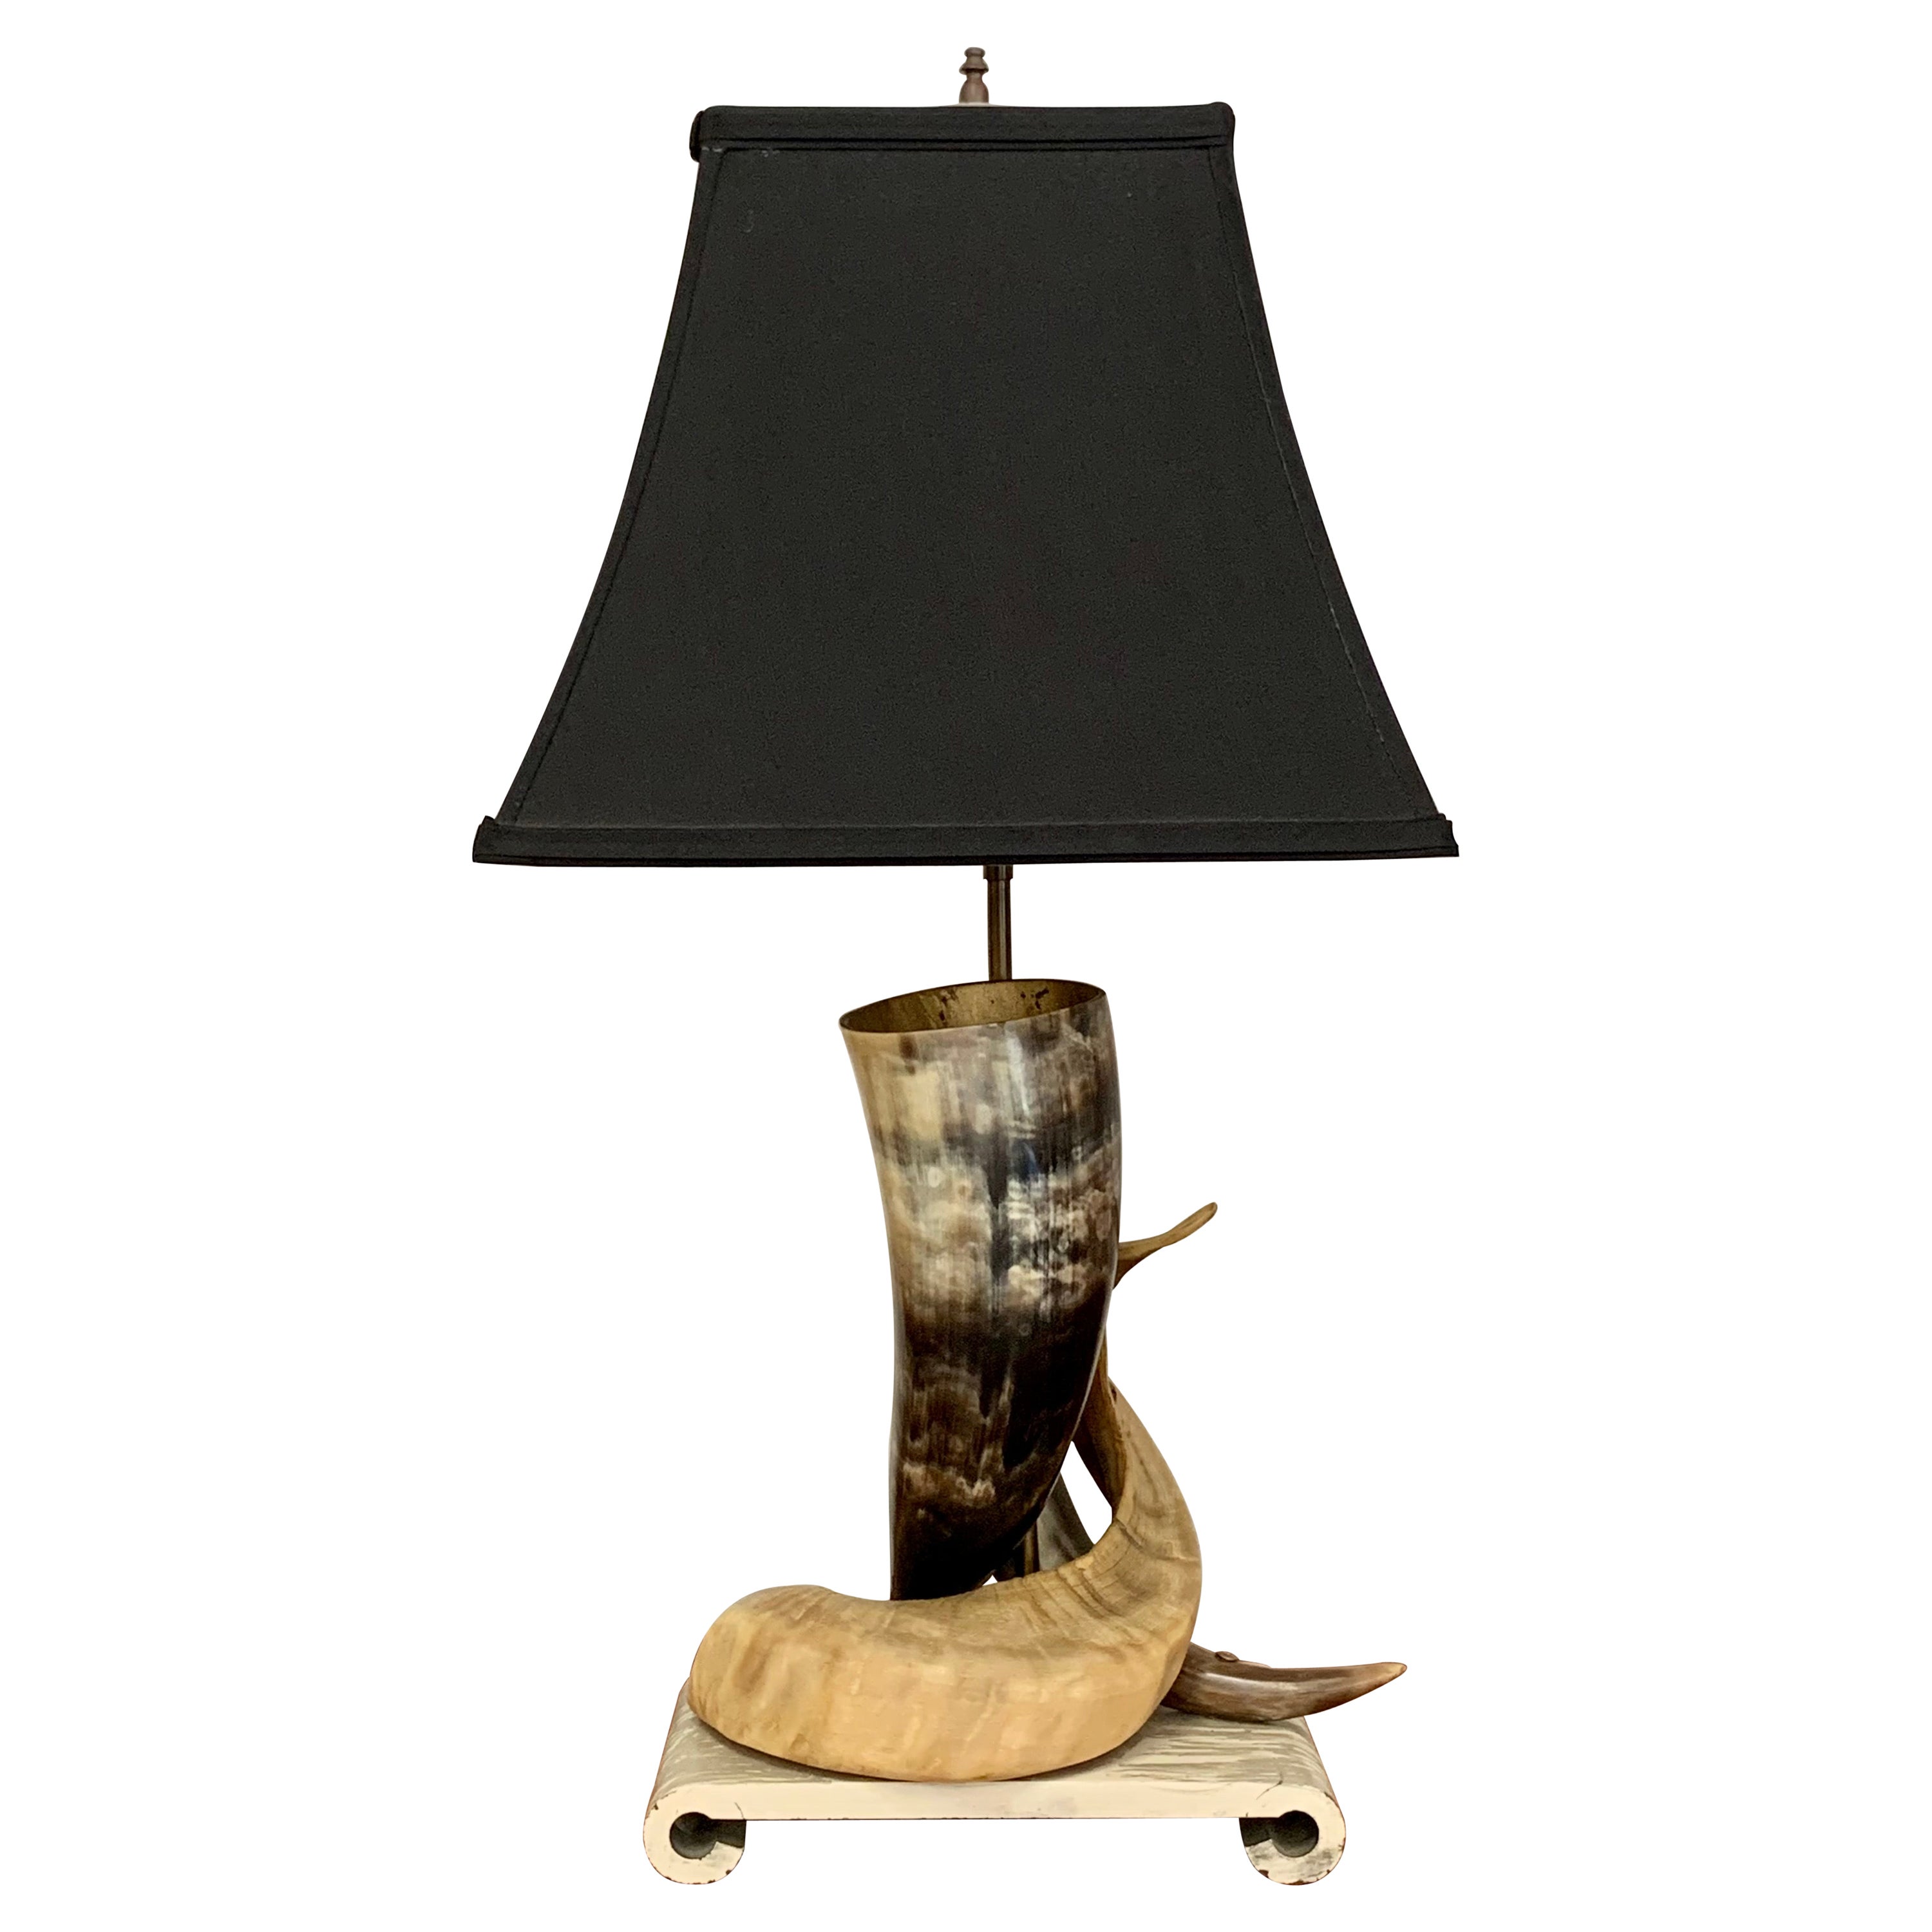 Decorative Steer Horn Table Lamp with Faux Marble Base